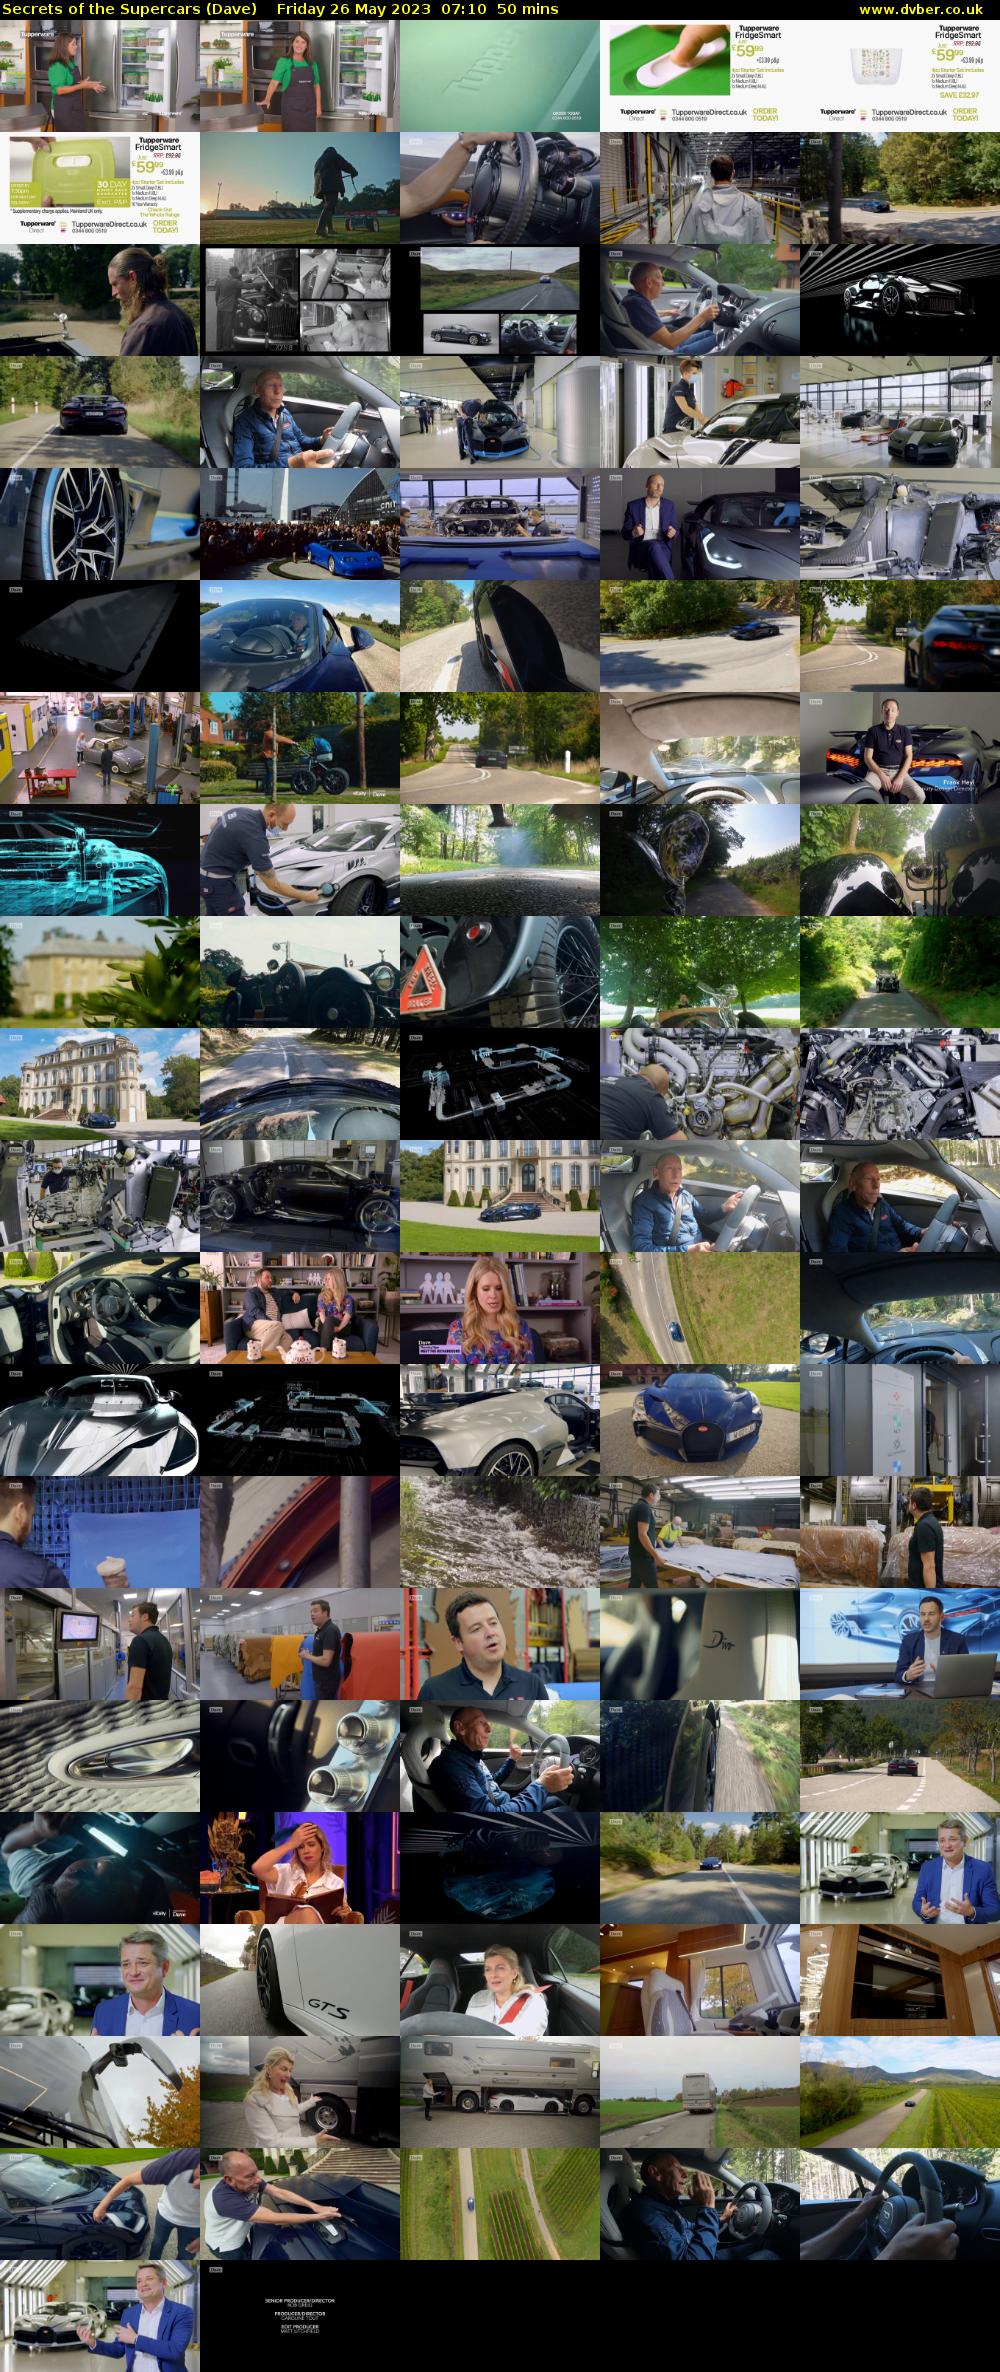 Secrets of the Supercars (Dave) Friday 26 May 2023 07:10 - 08:00